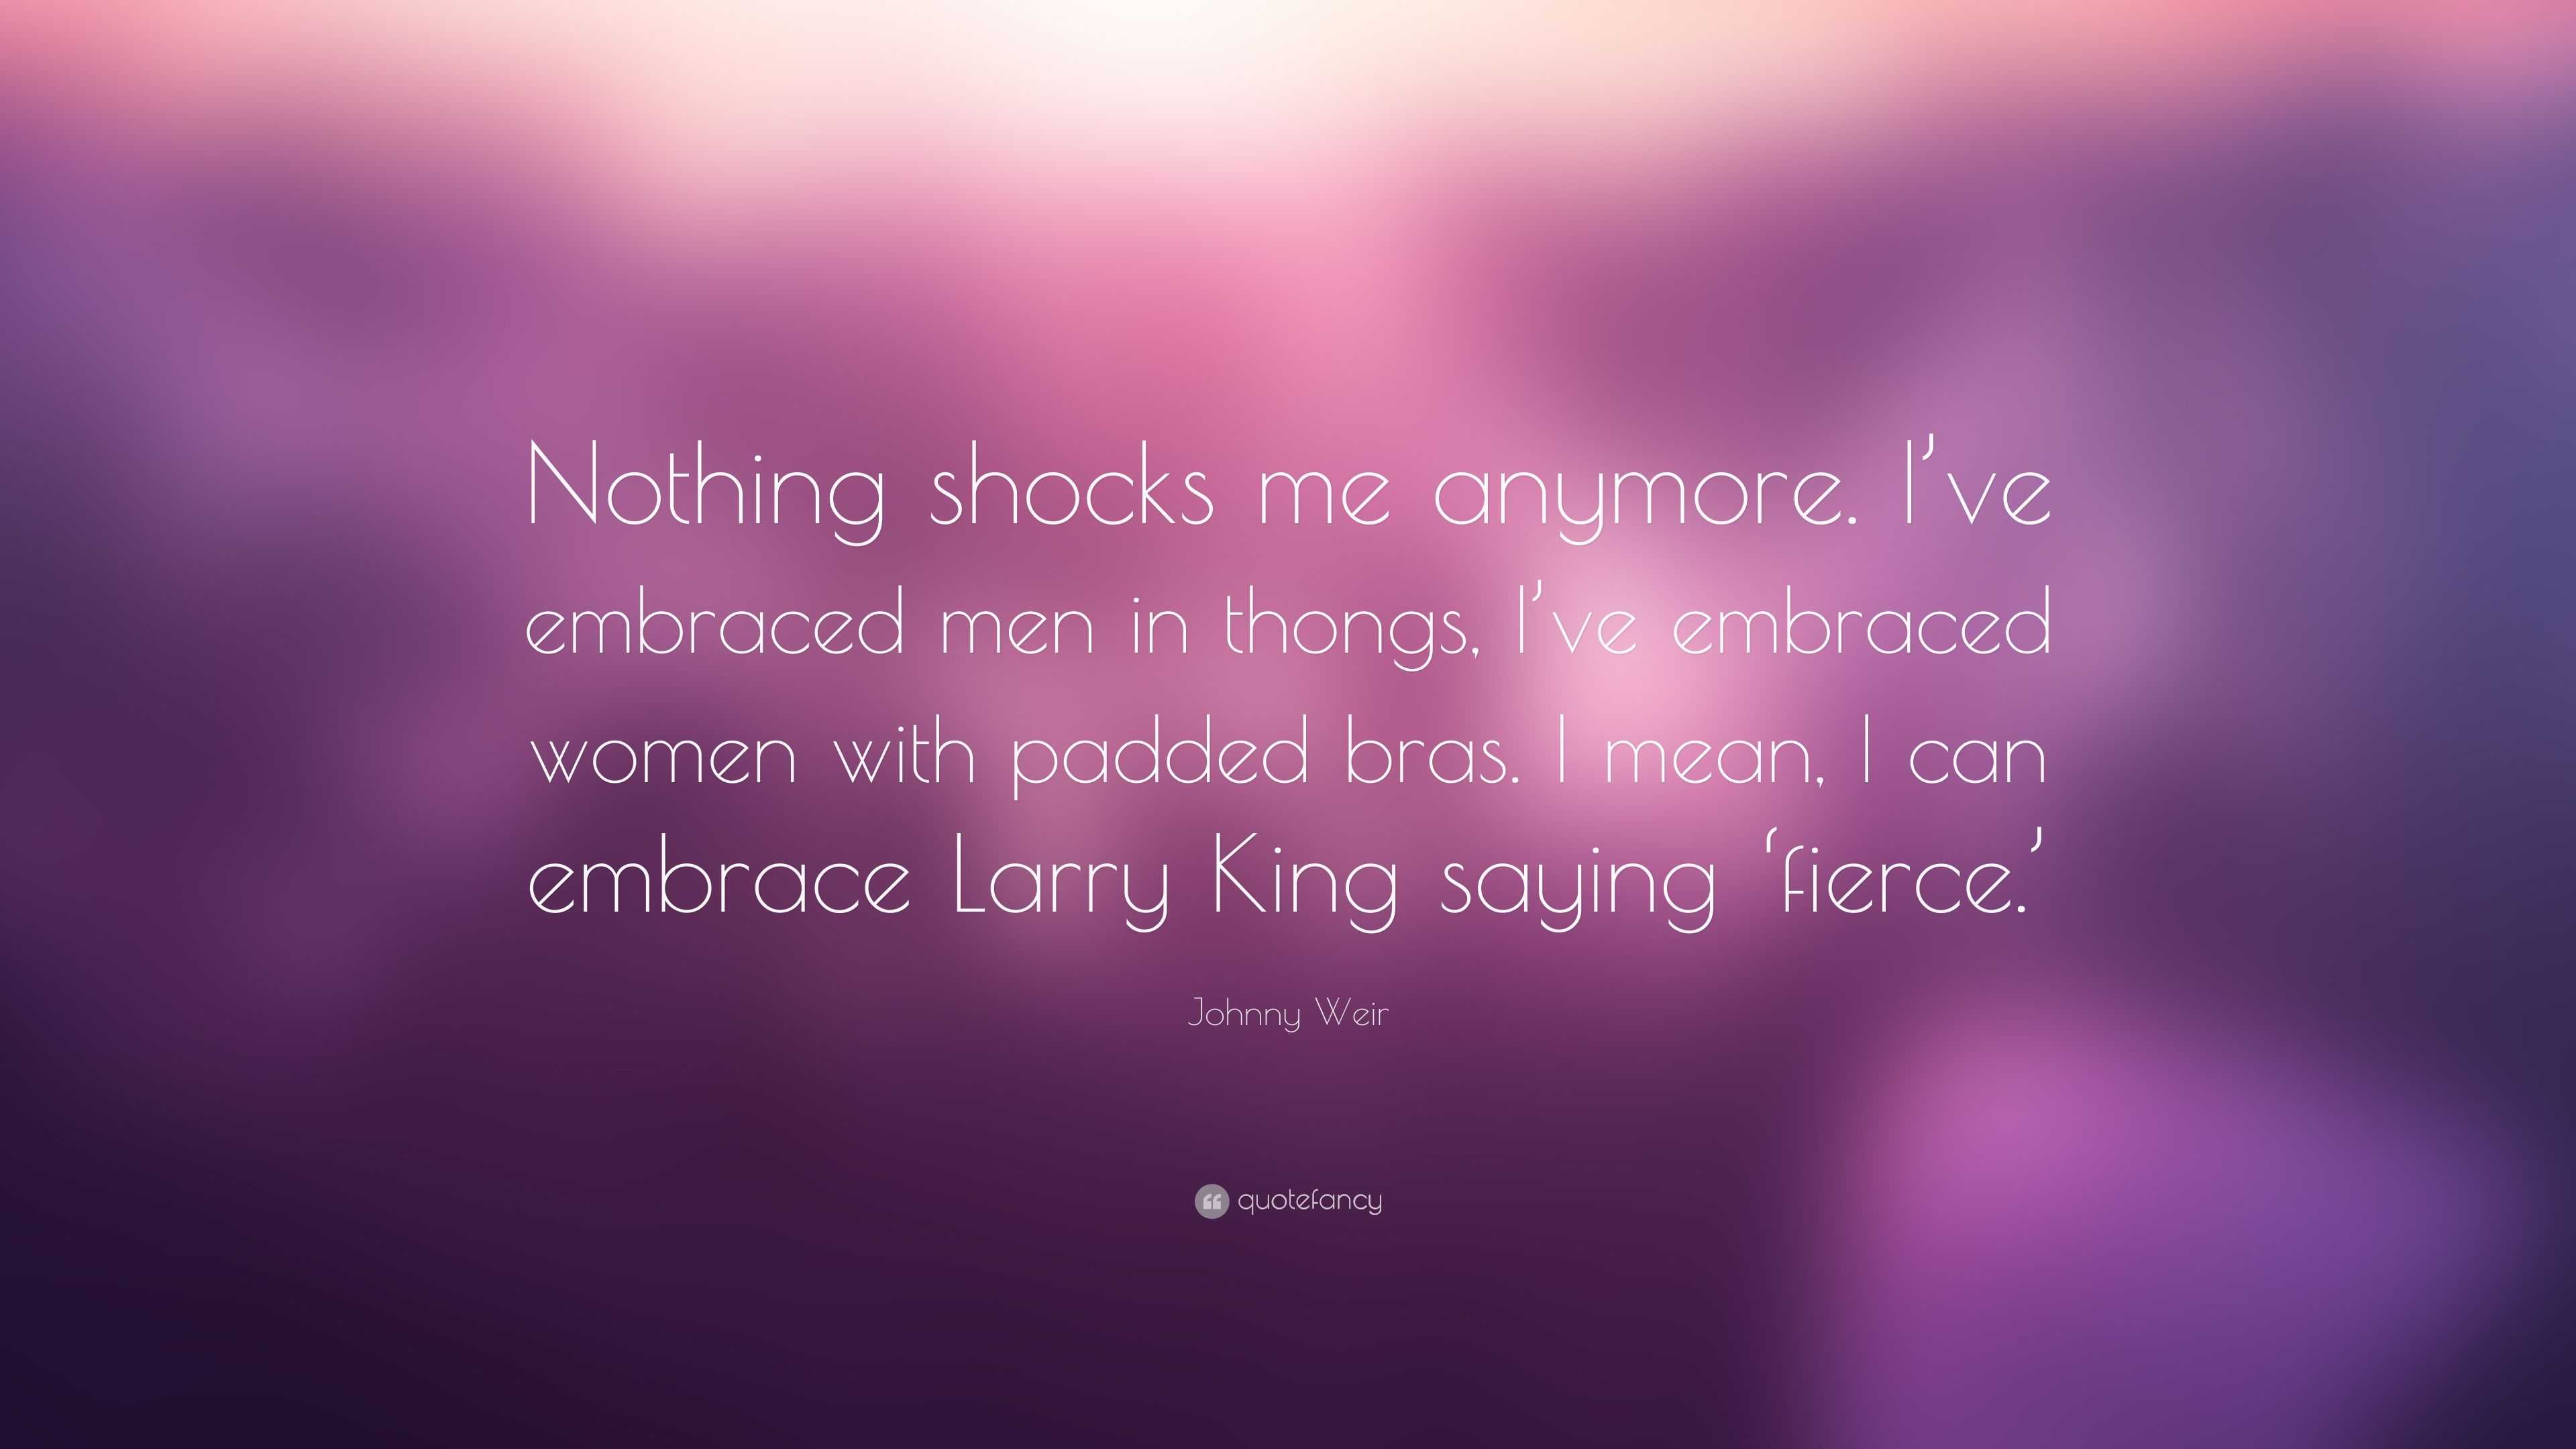 Johnny Weir Quote: “Nothing shocks me anymore. I've embraced men